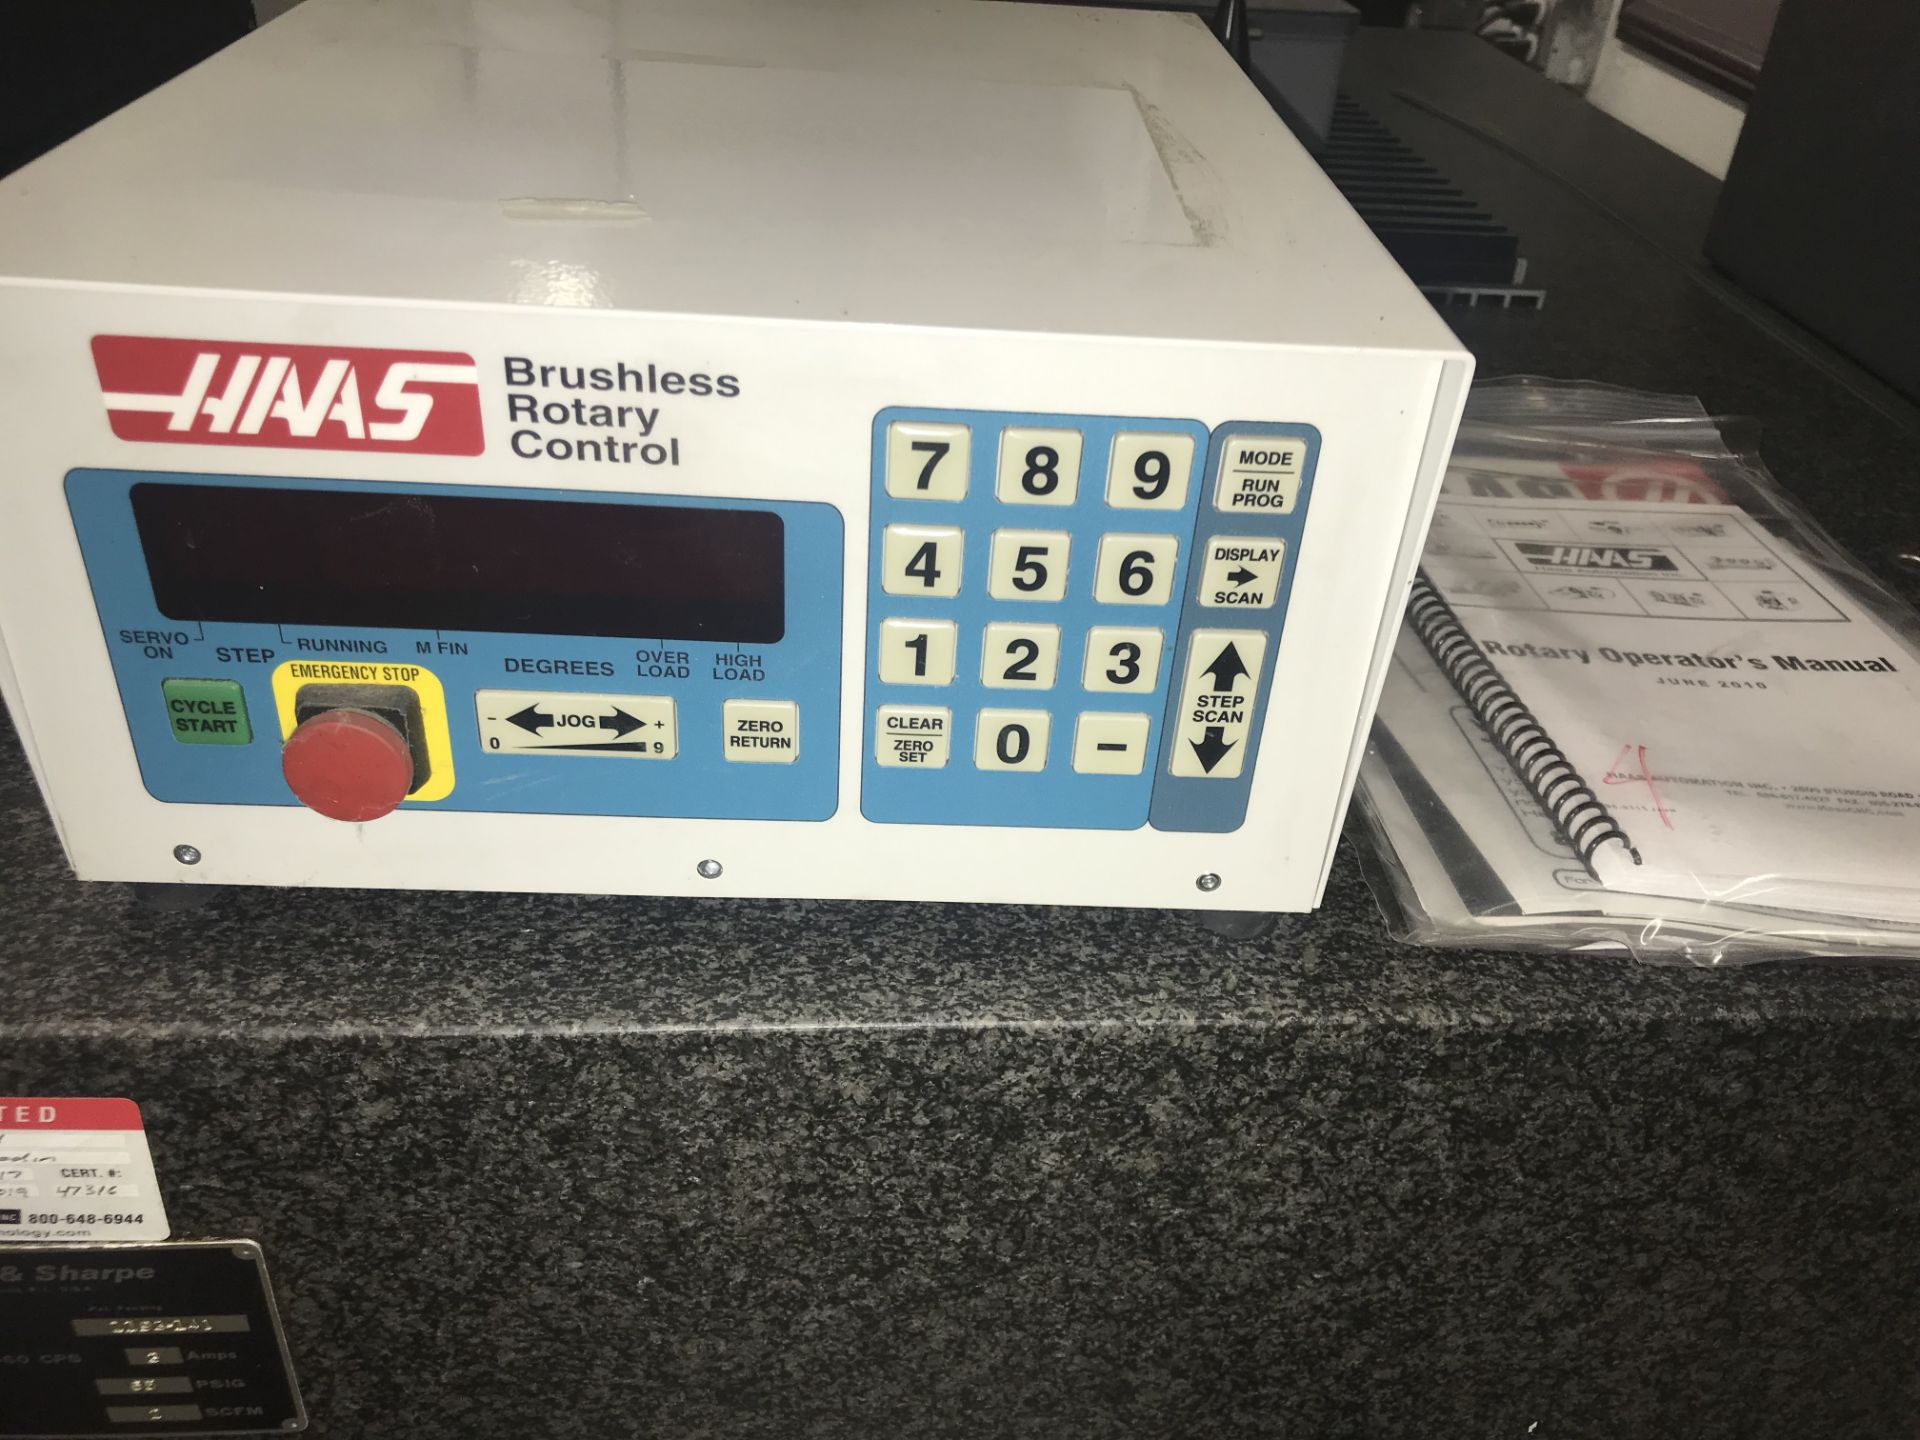 HAAS BRUSHLESS ROTARY CONTROL, NEVER USED, SN: 8020980